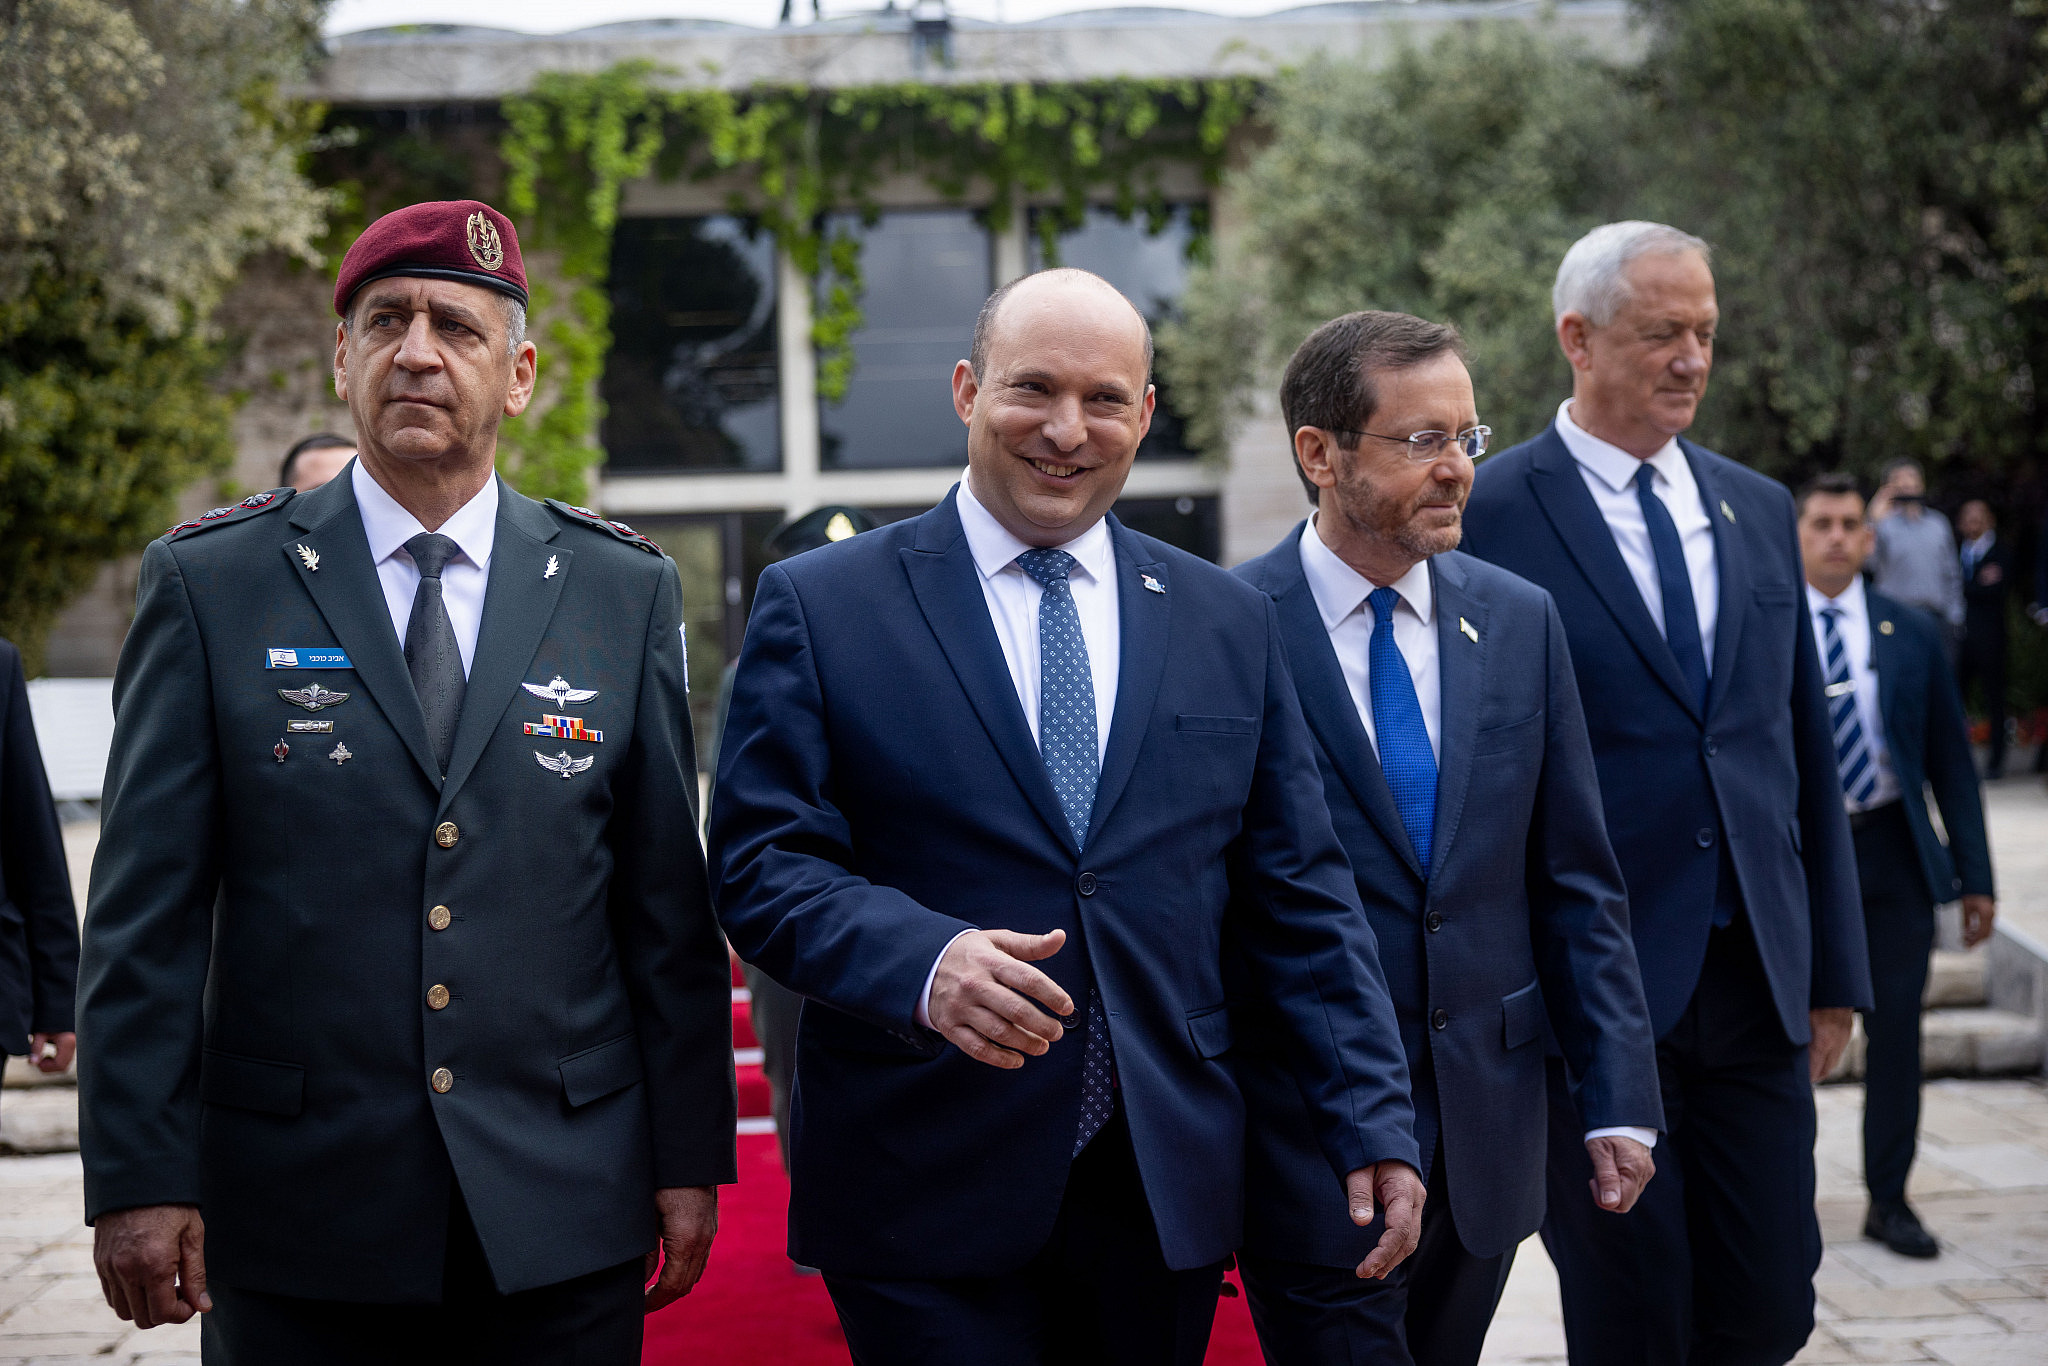 Israeli President Isaac Herzog, Prime Minister Naftali Bennett, Defense Minister Benny Gantz, and IDF Chief of Staff Aviv Kochavi at an event for outstanding soldiers as part of Israel's 74th Independence Day celebrations, at the President's residence in Jerusalem, May 5, 2022. (Yonatan Sindel/Flash90)